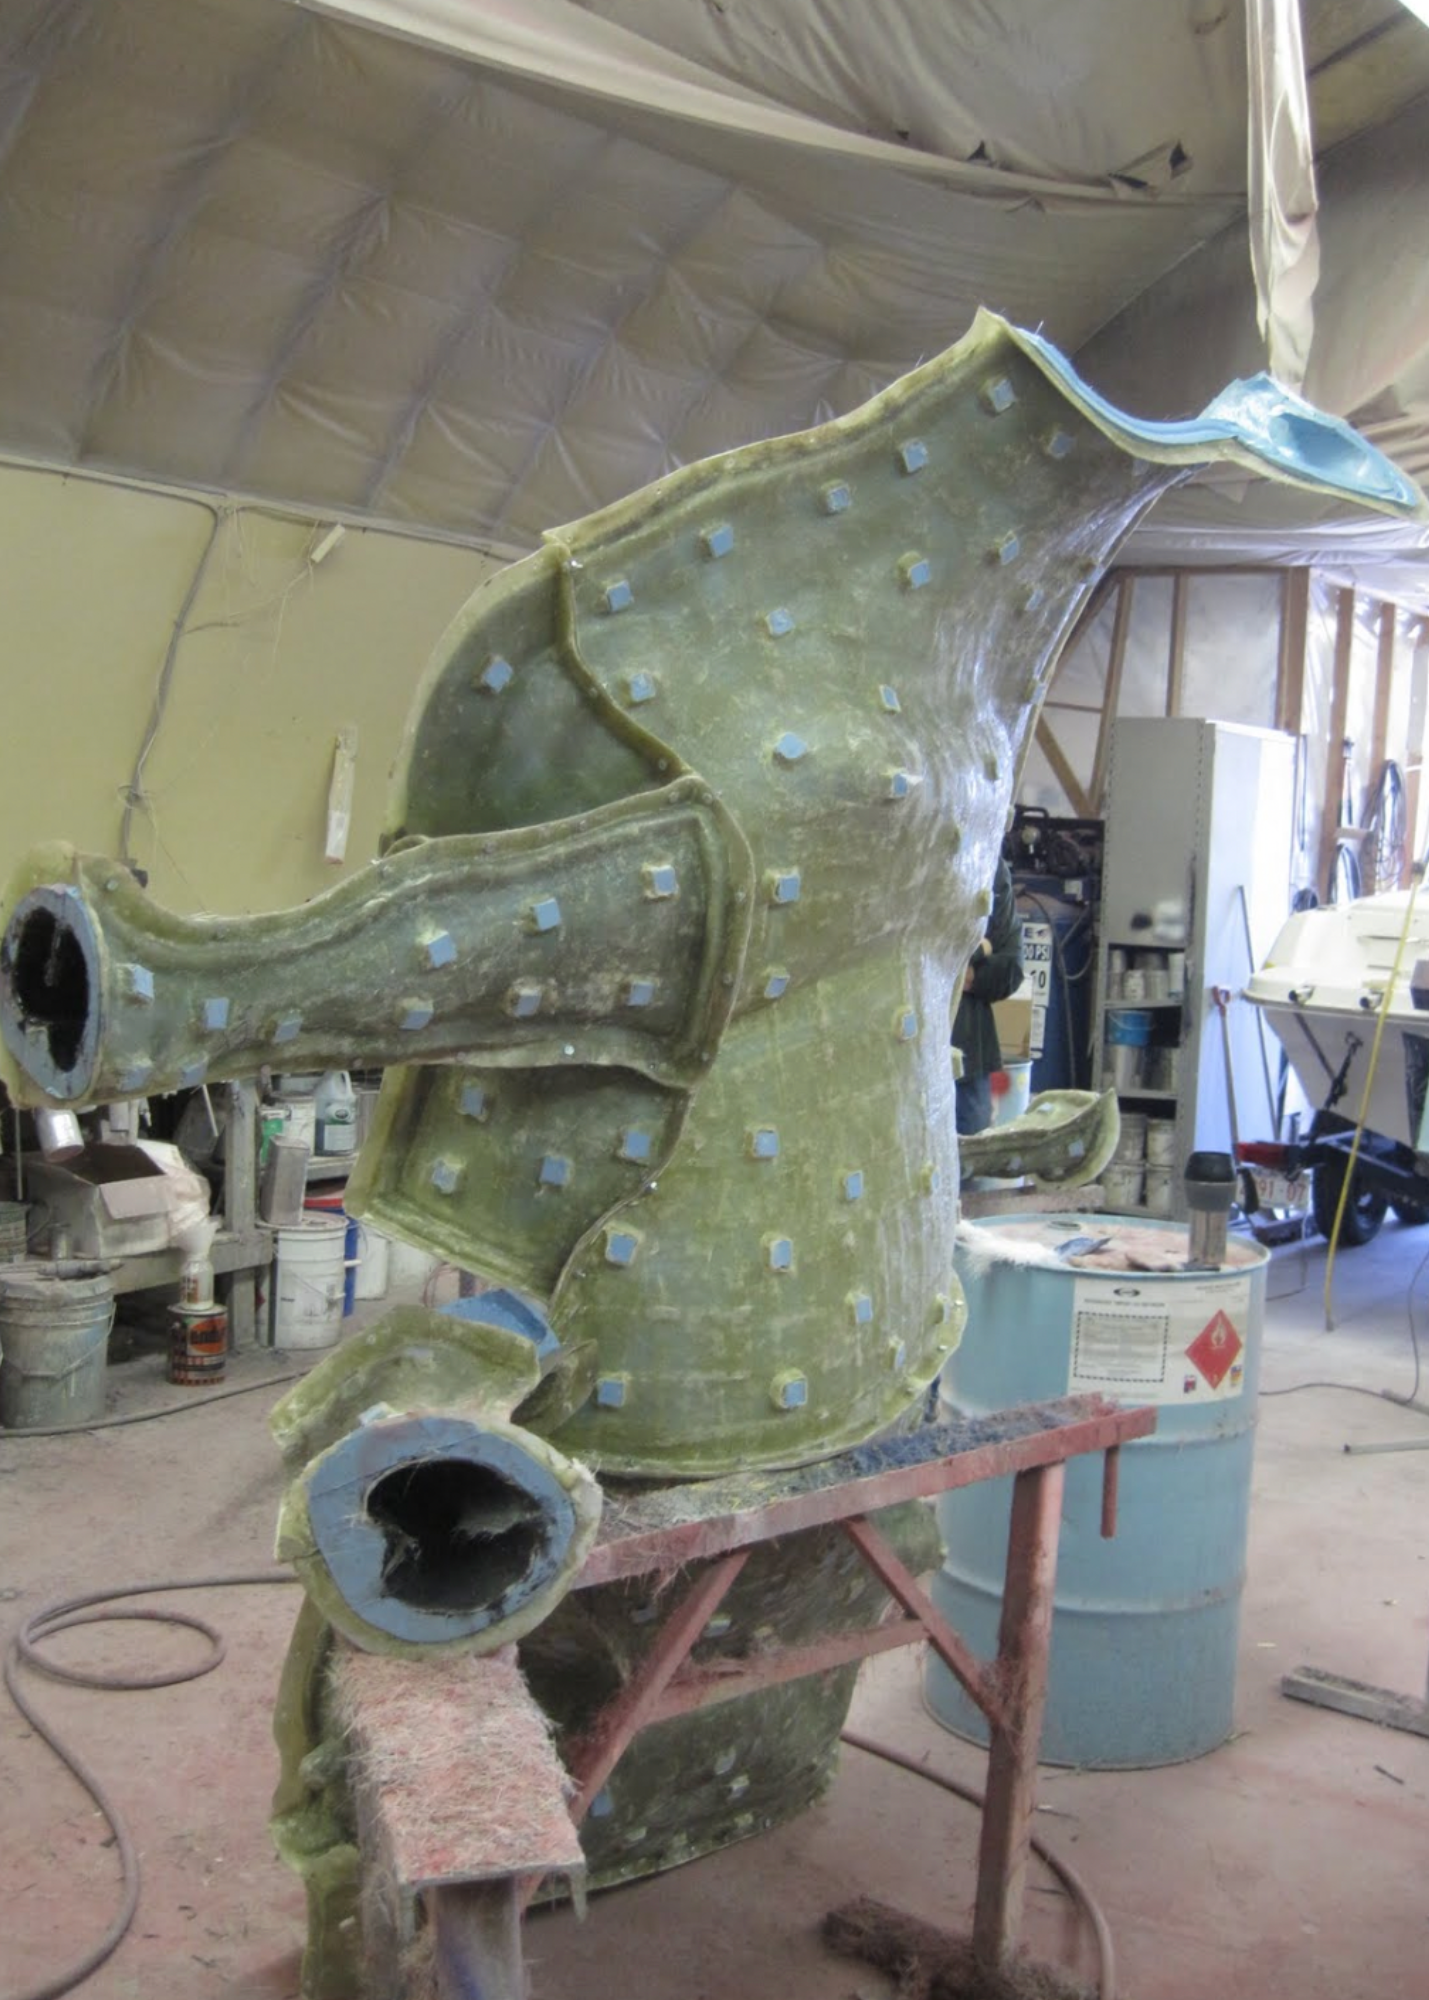 Another view of the Holstein mold during the fiberglass lay-up process.